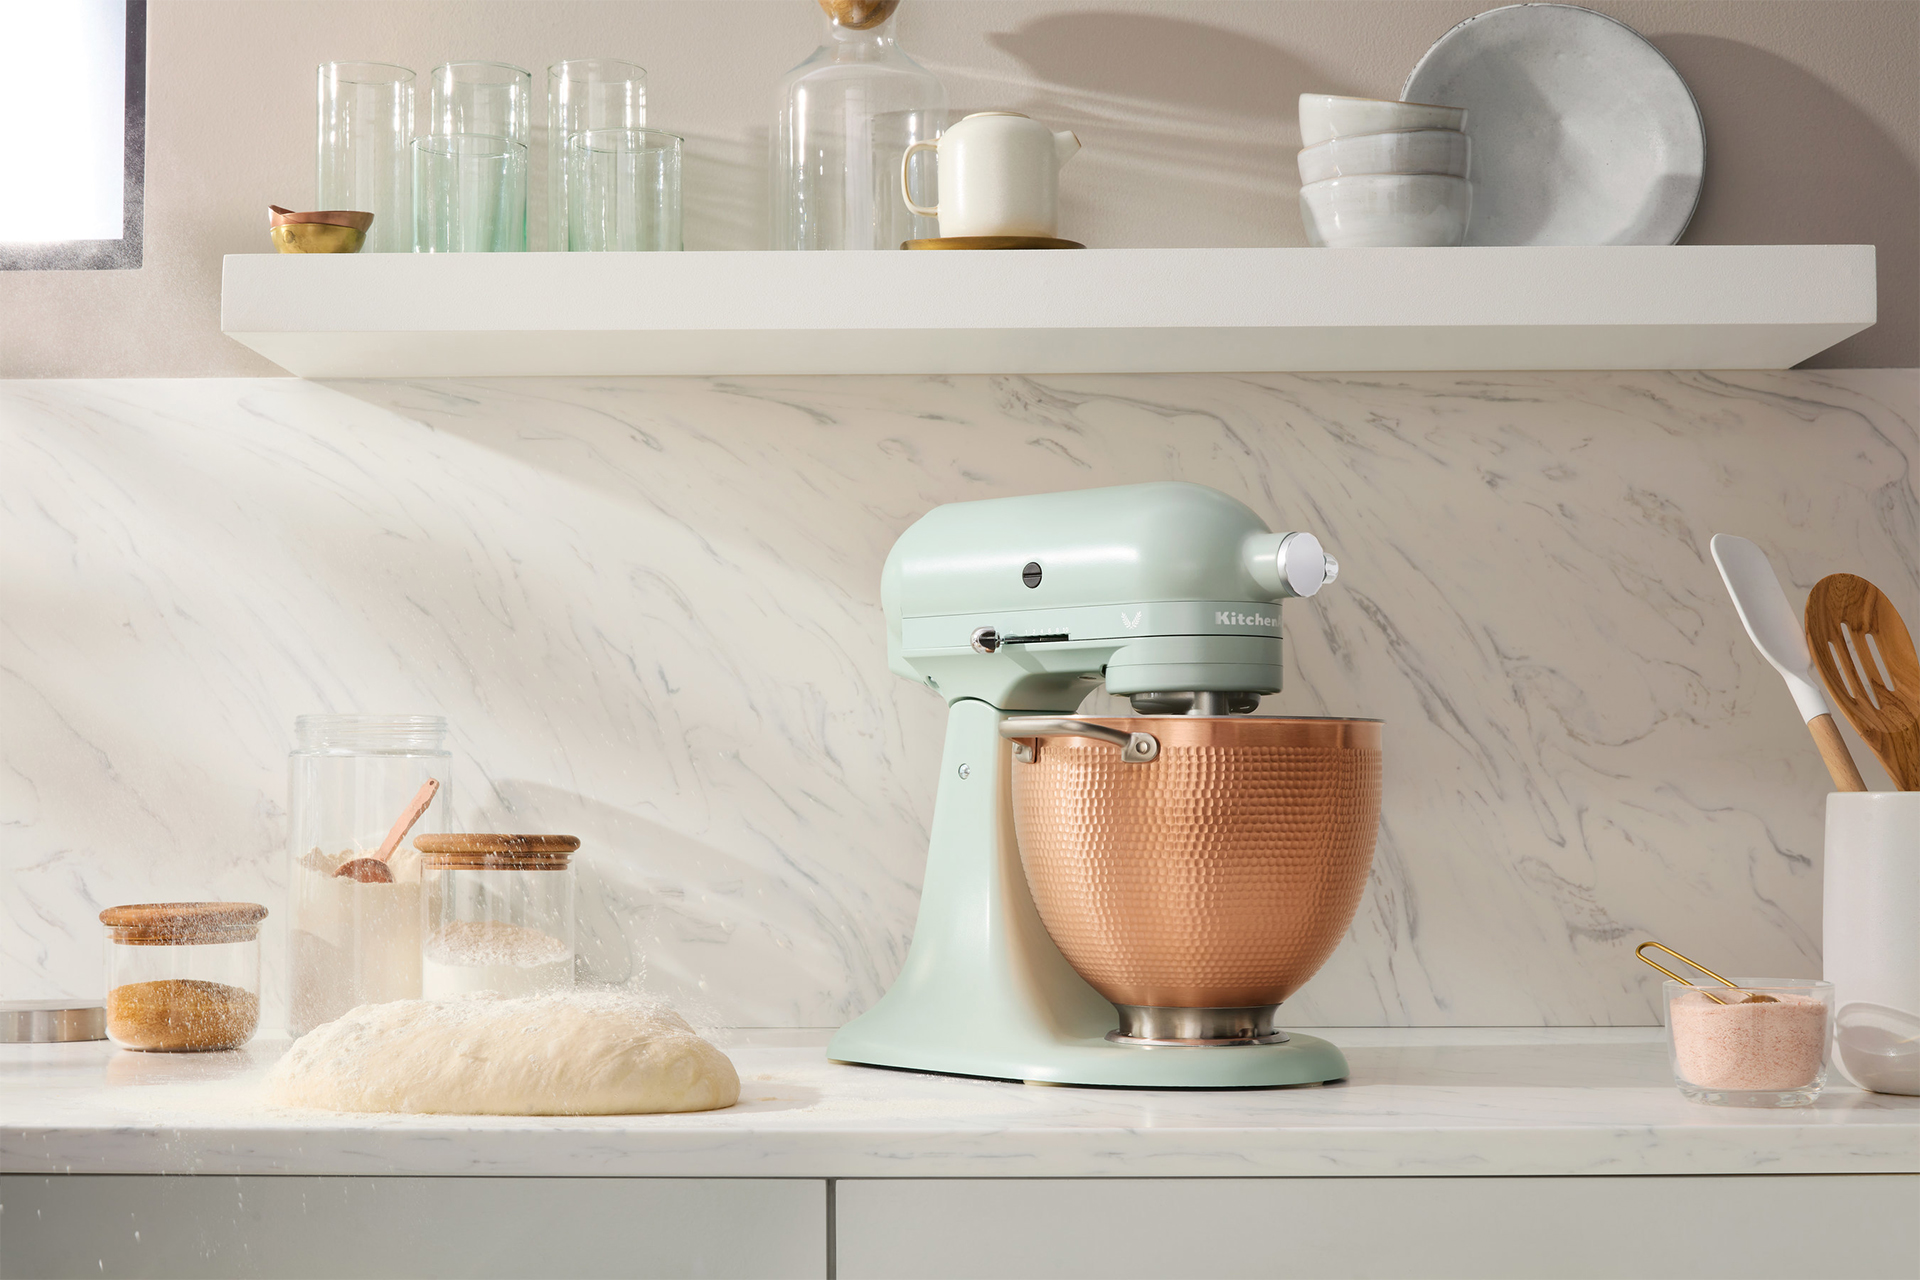 KitchenAid has released a new stand mixer with a hammered copper bowl